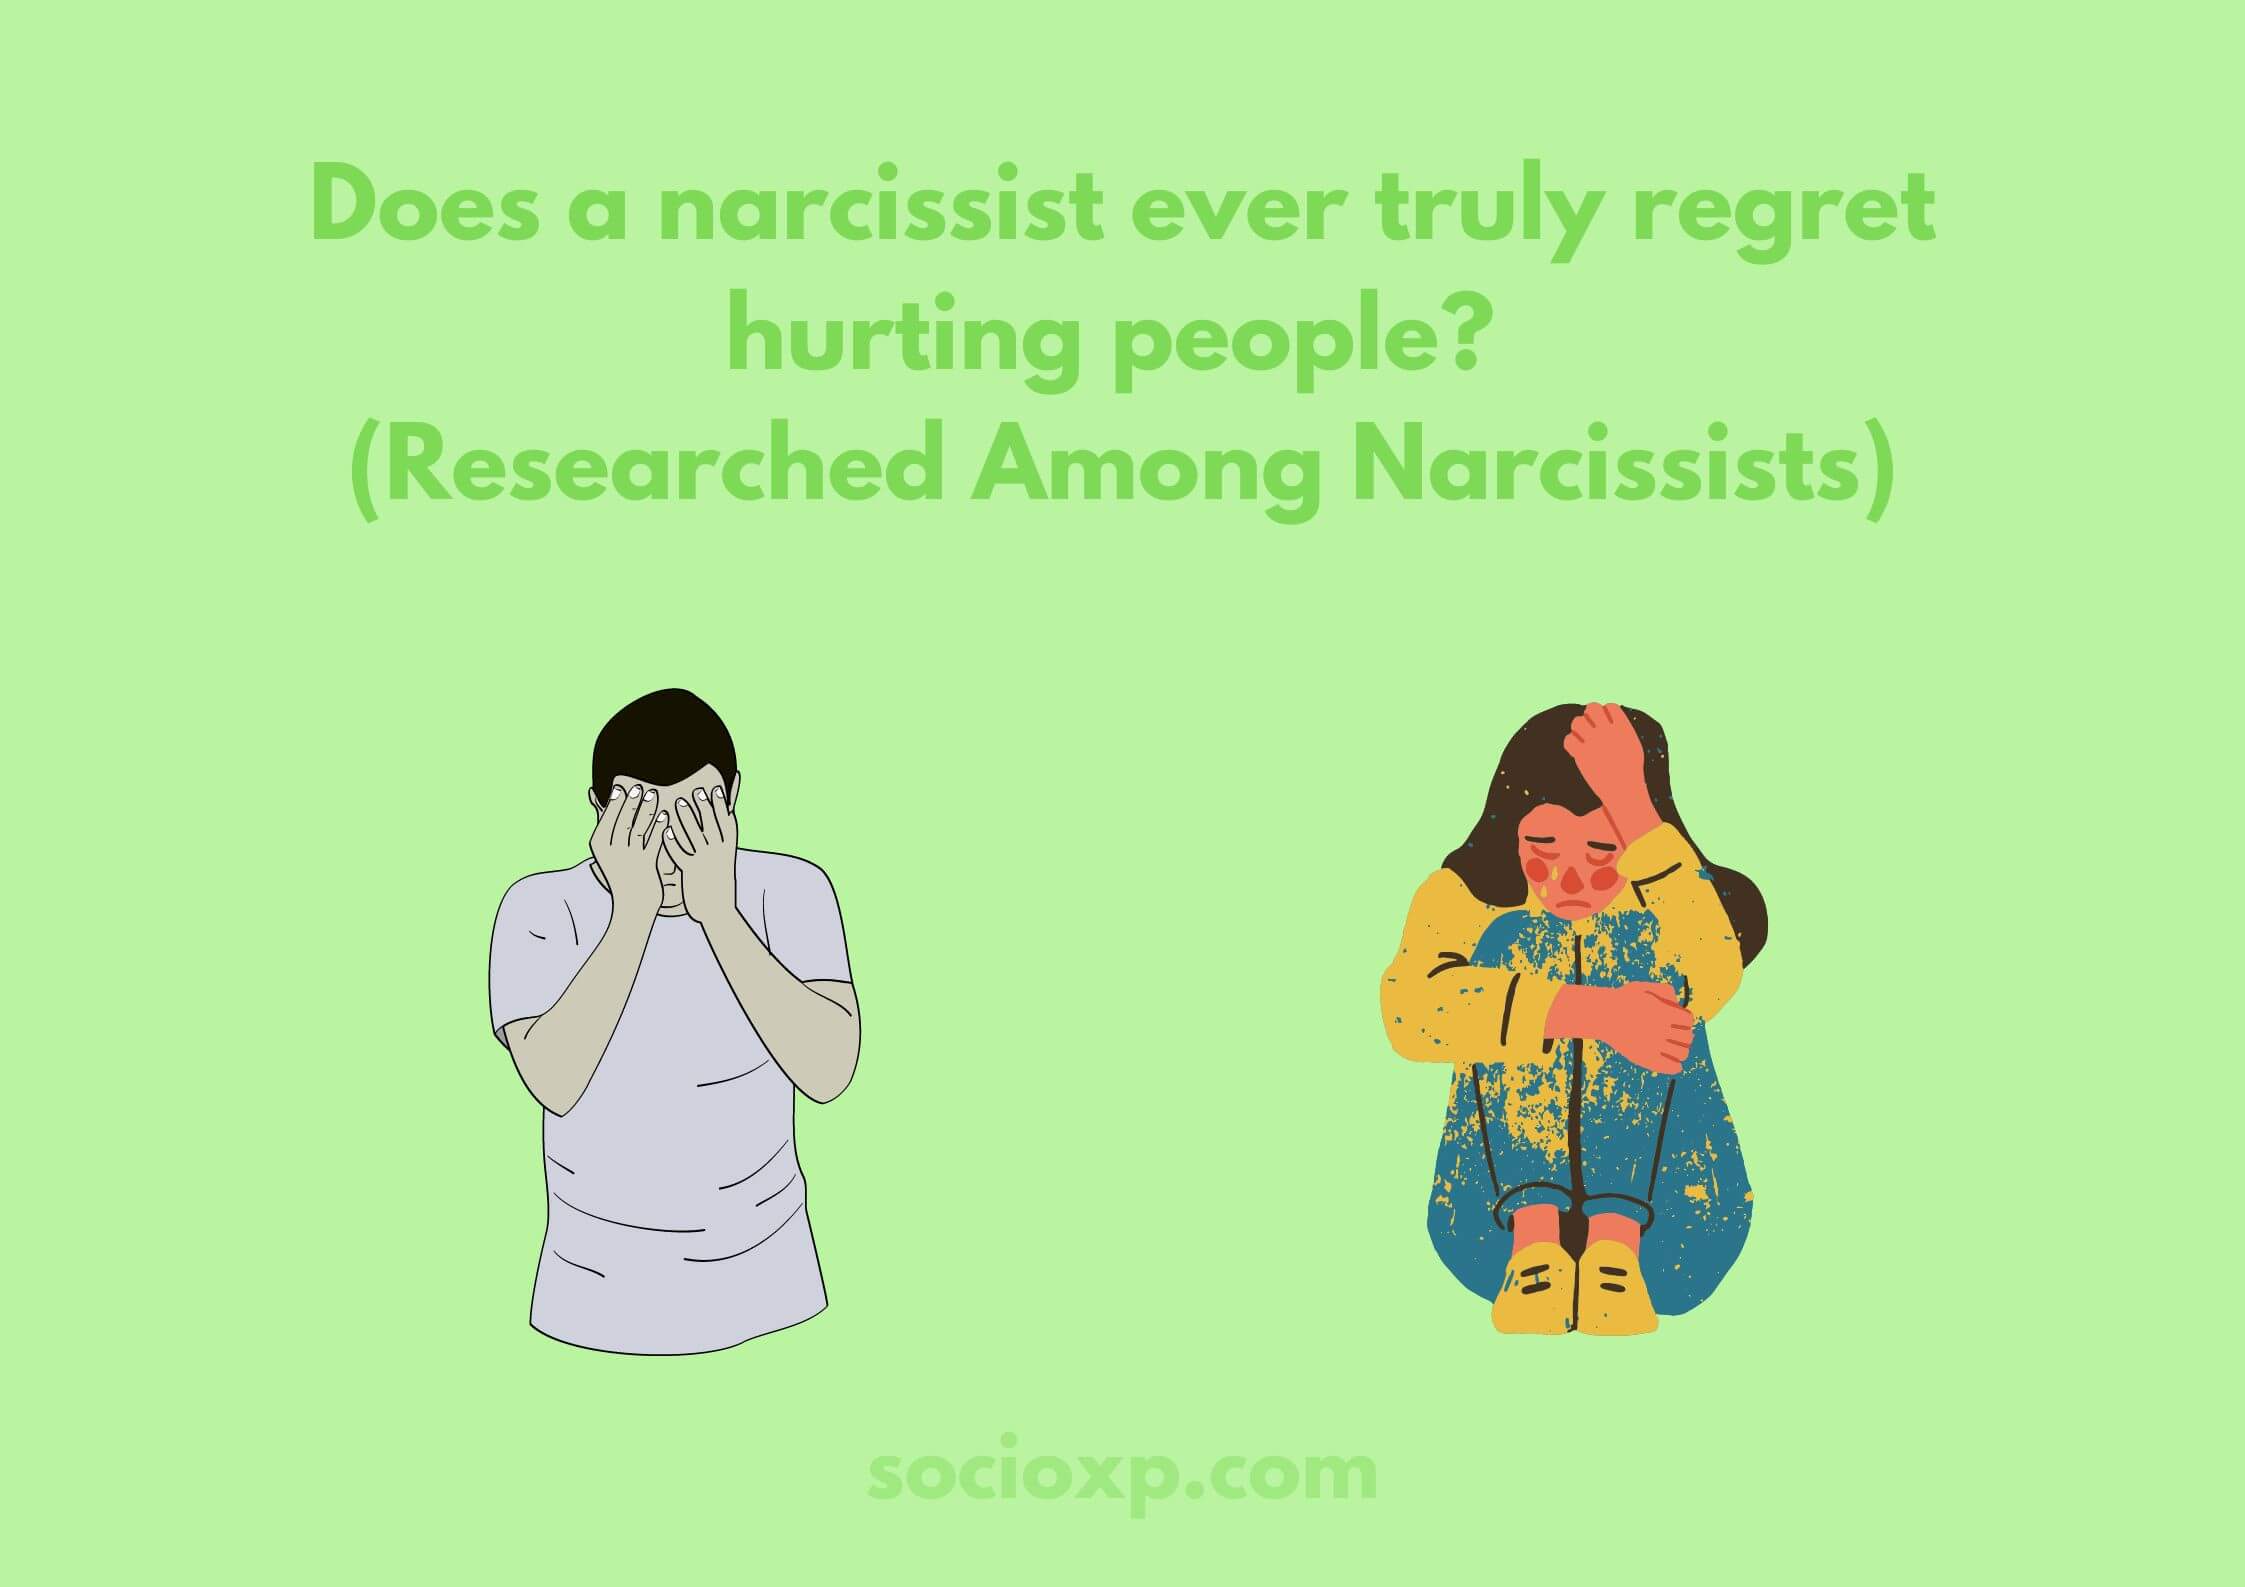 Does a narcissist ever truly regret hurting people? (Researched Among Narcissists)